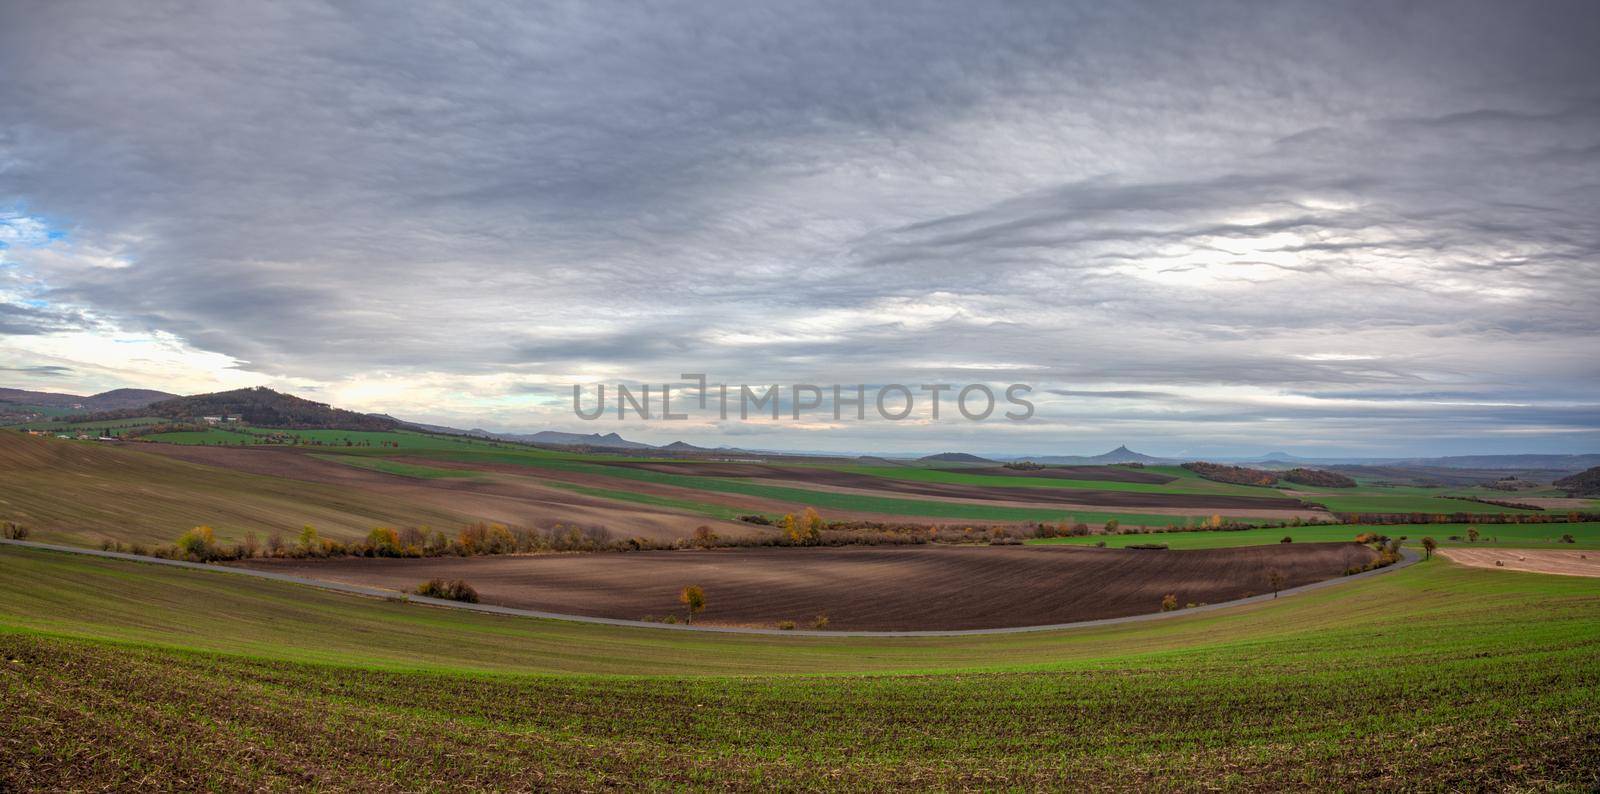 View of field divided into sectors by wheat varieties. Panorama Image. HDR Image.